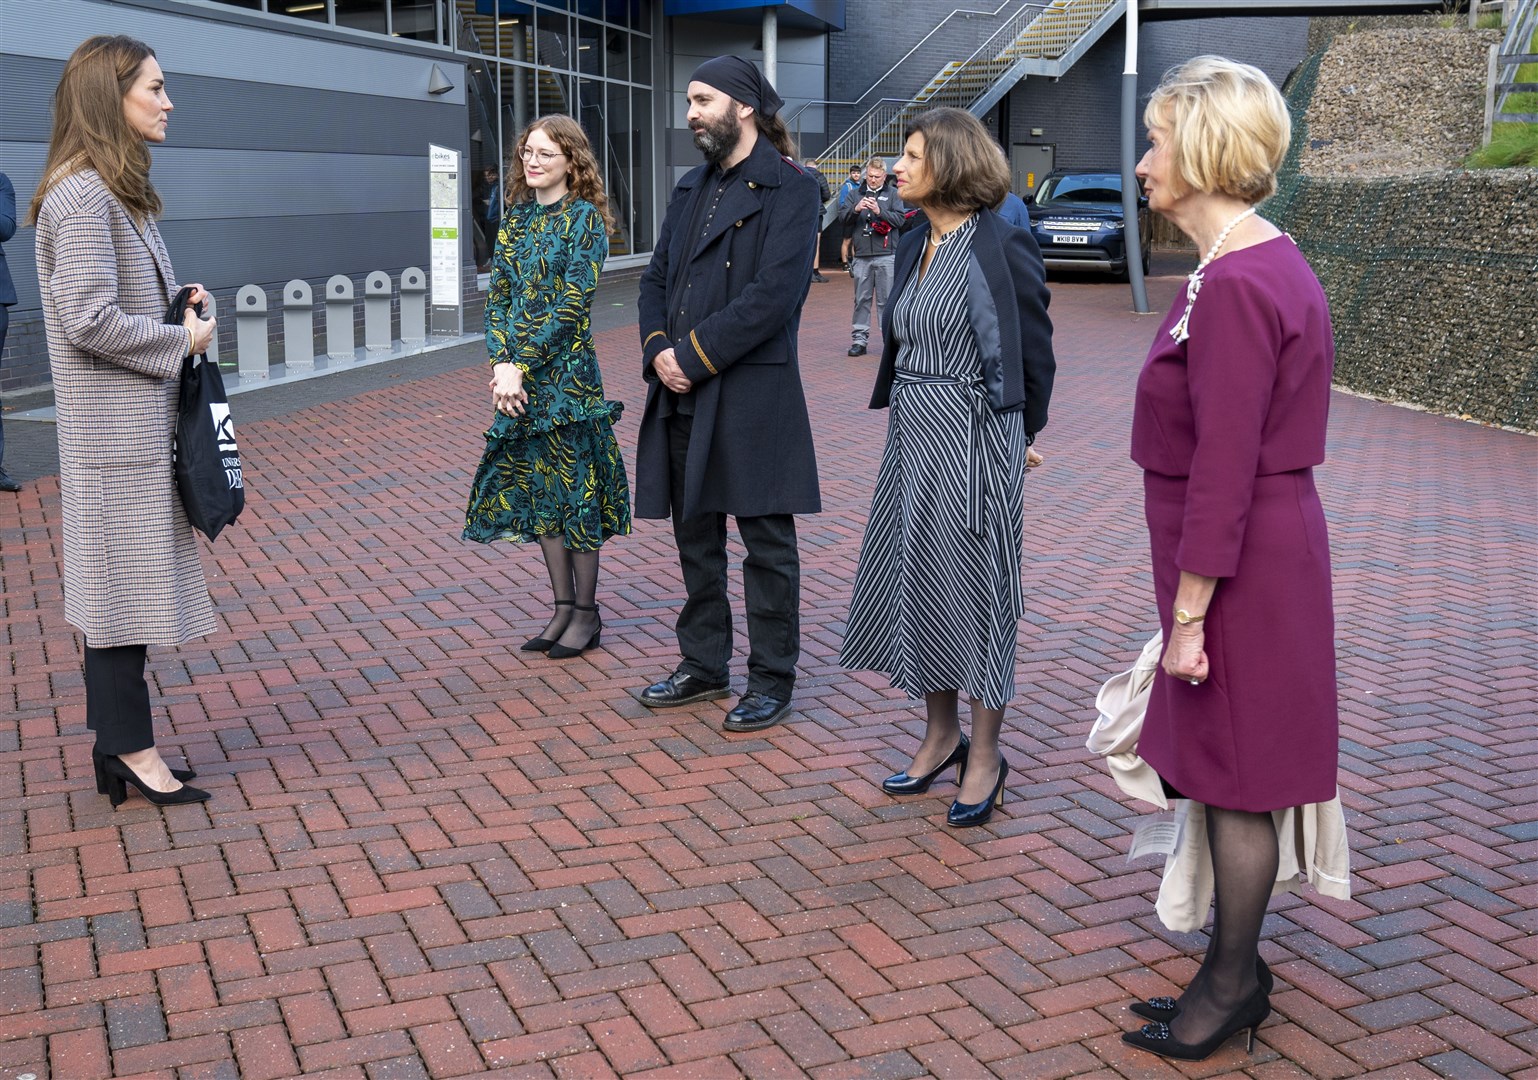 The Duchess of Cambridge talks to staff and students during her university visit (Arthur Edwards/The Sun/PA)